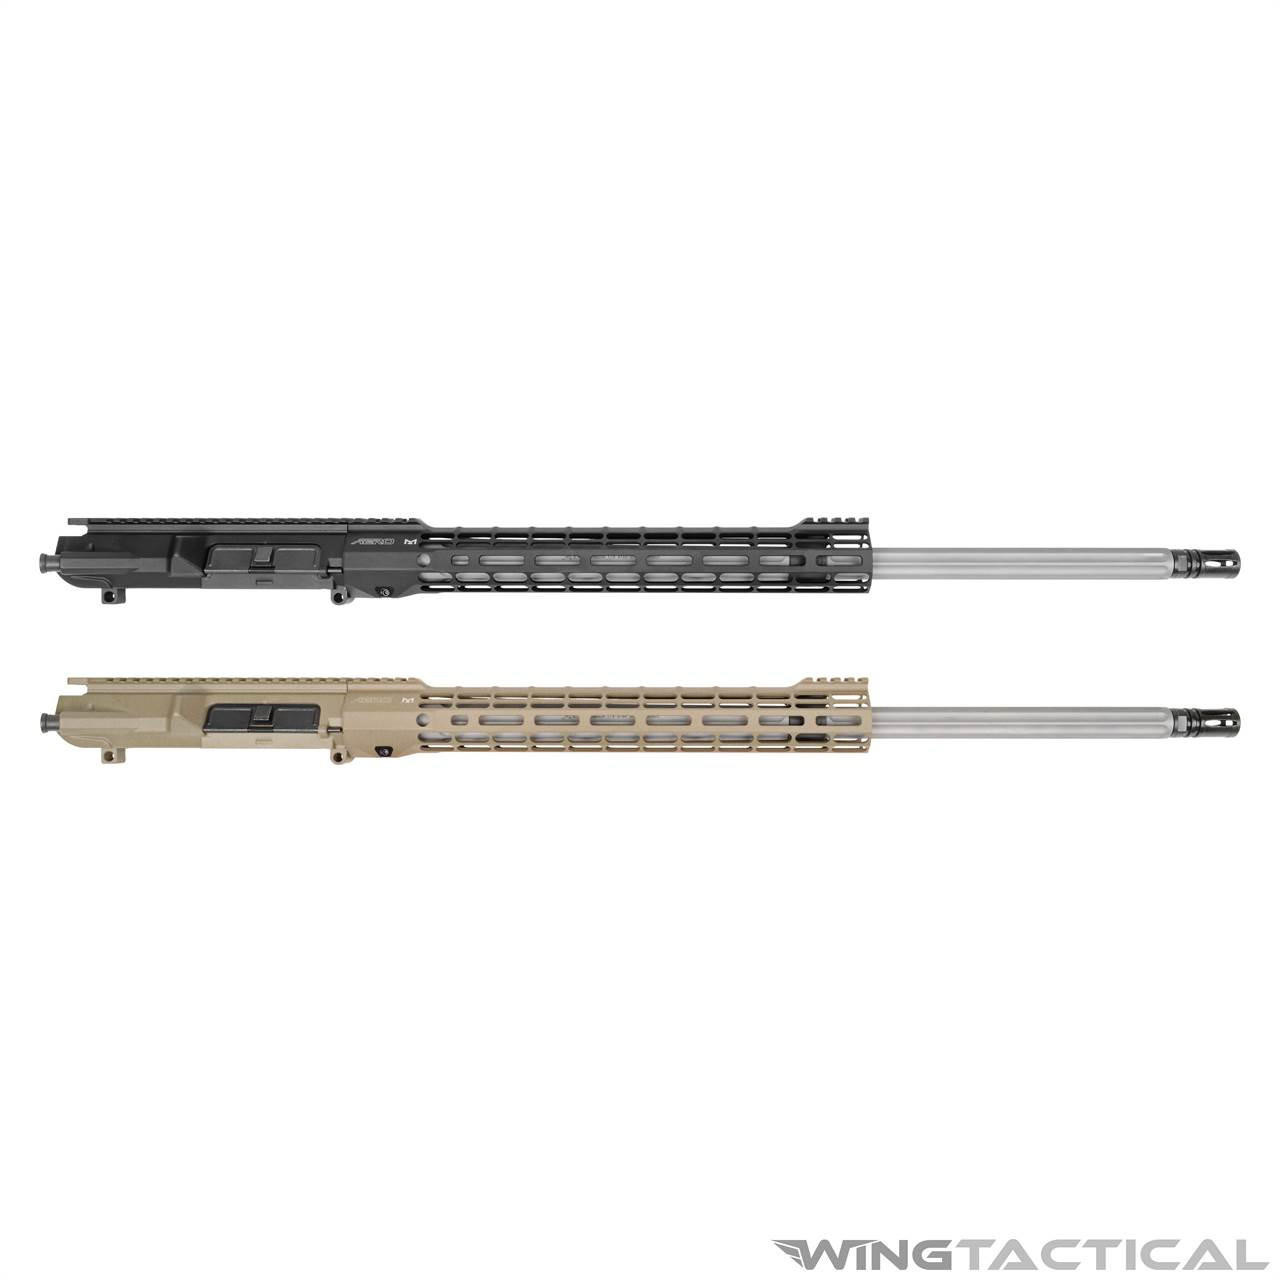  Aero Precision 24" 6.5 Creedmoor Fluted Stainless Steel M5 Complete Upper Assembly 